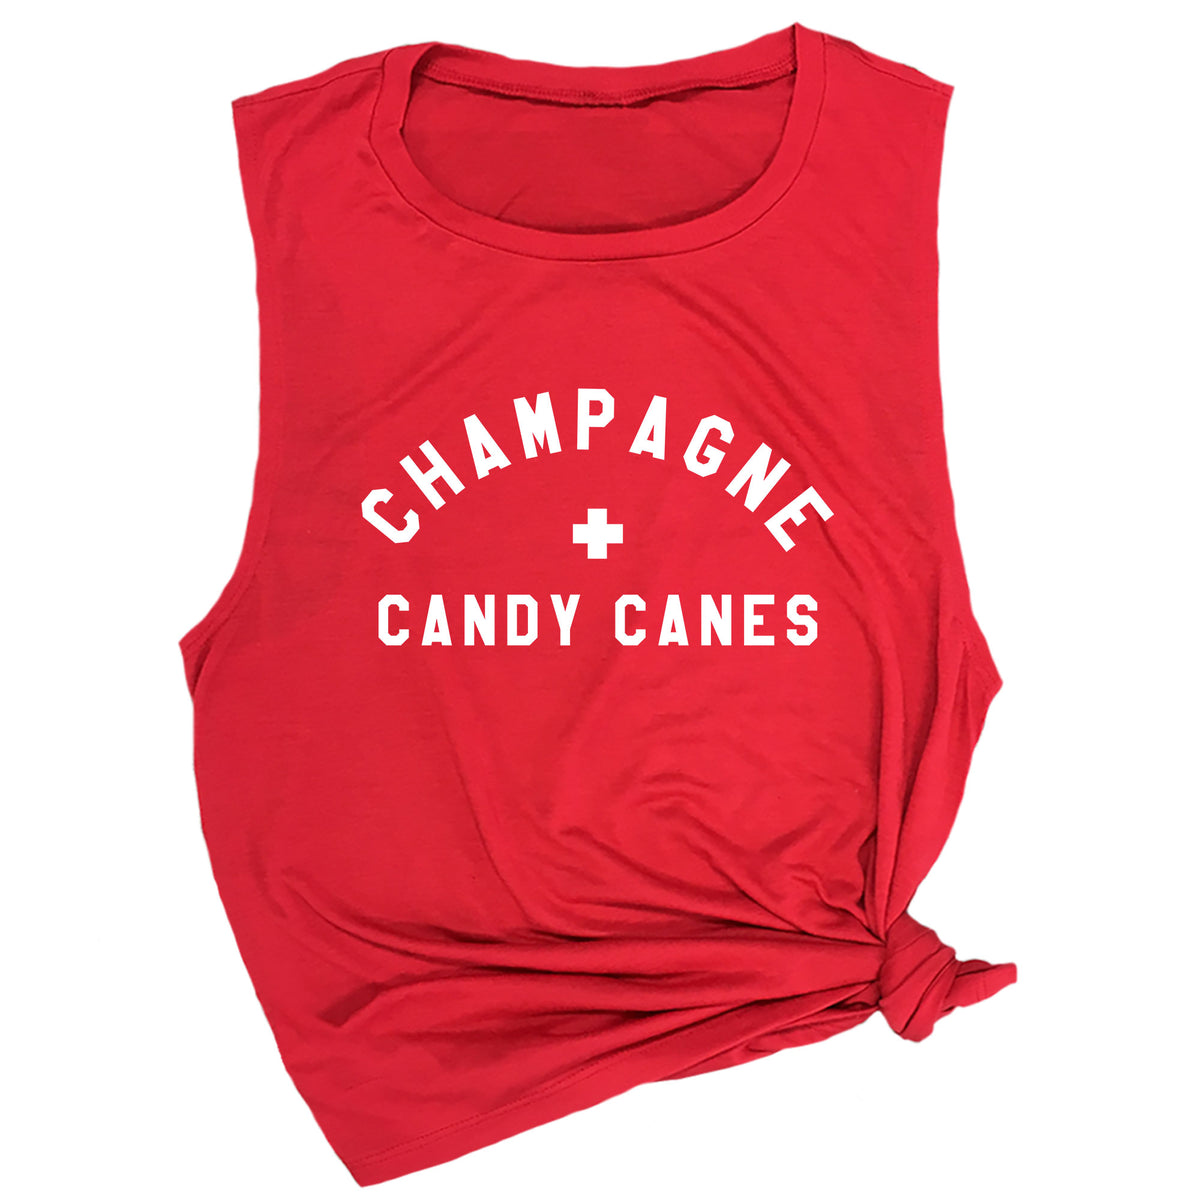 Champagne + Candy Canes Muscle Tee